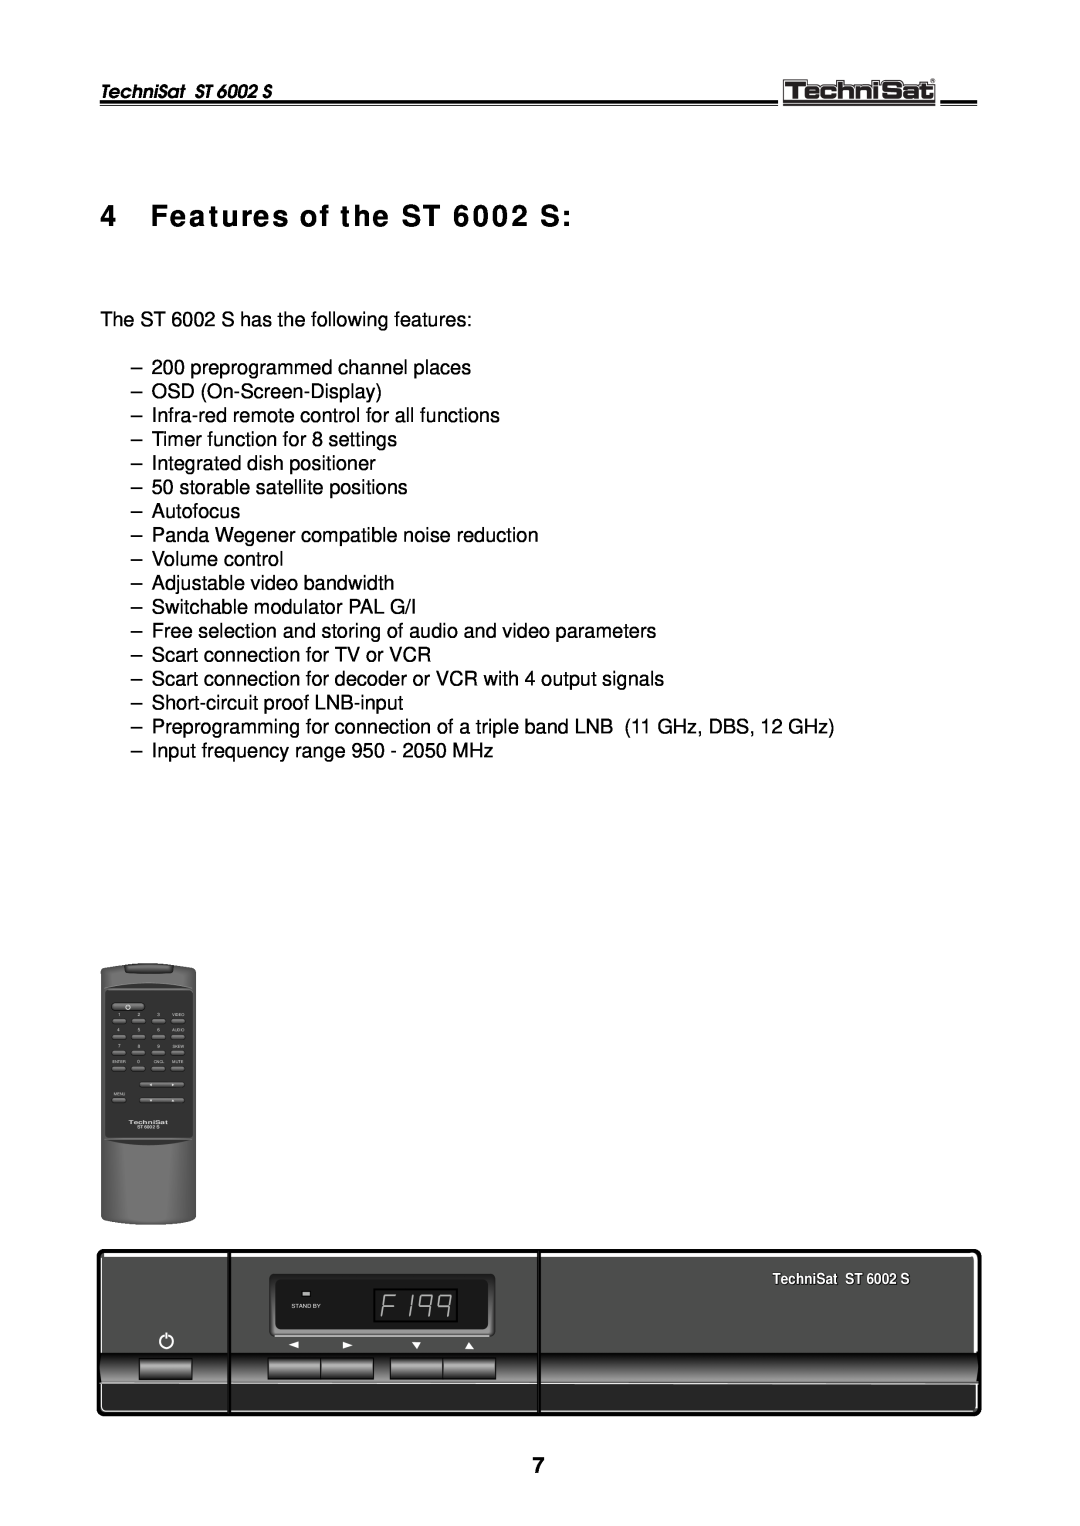 TechniSat manual Features of the ST 6002 S 